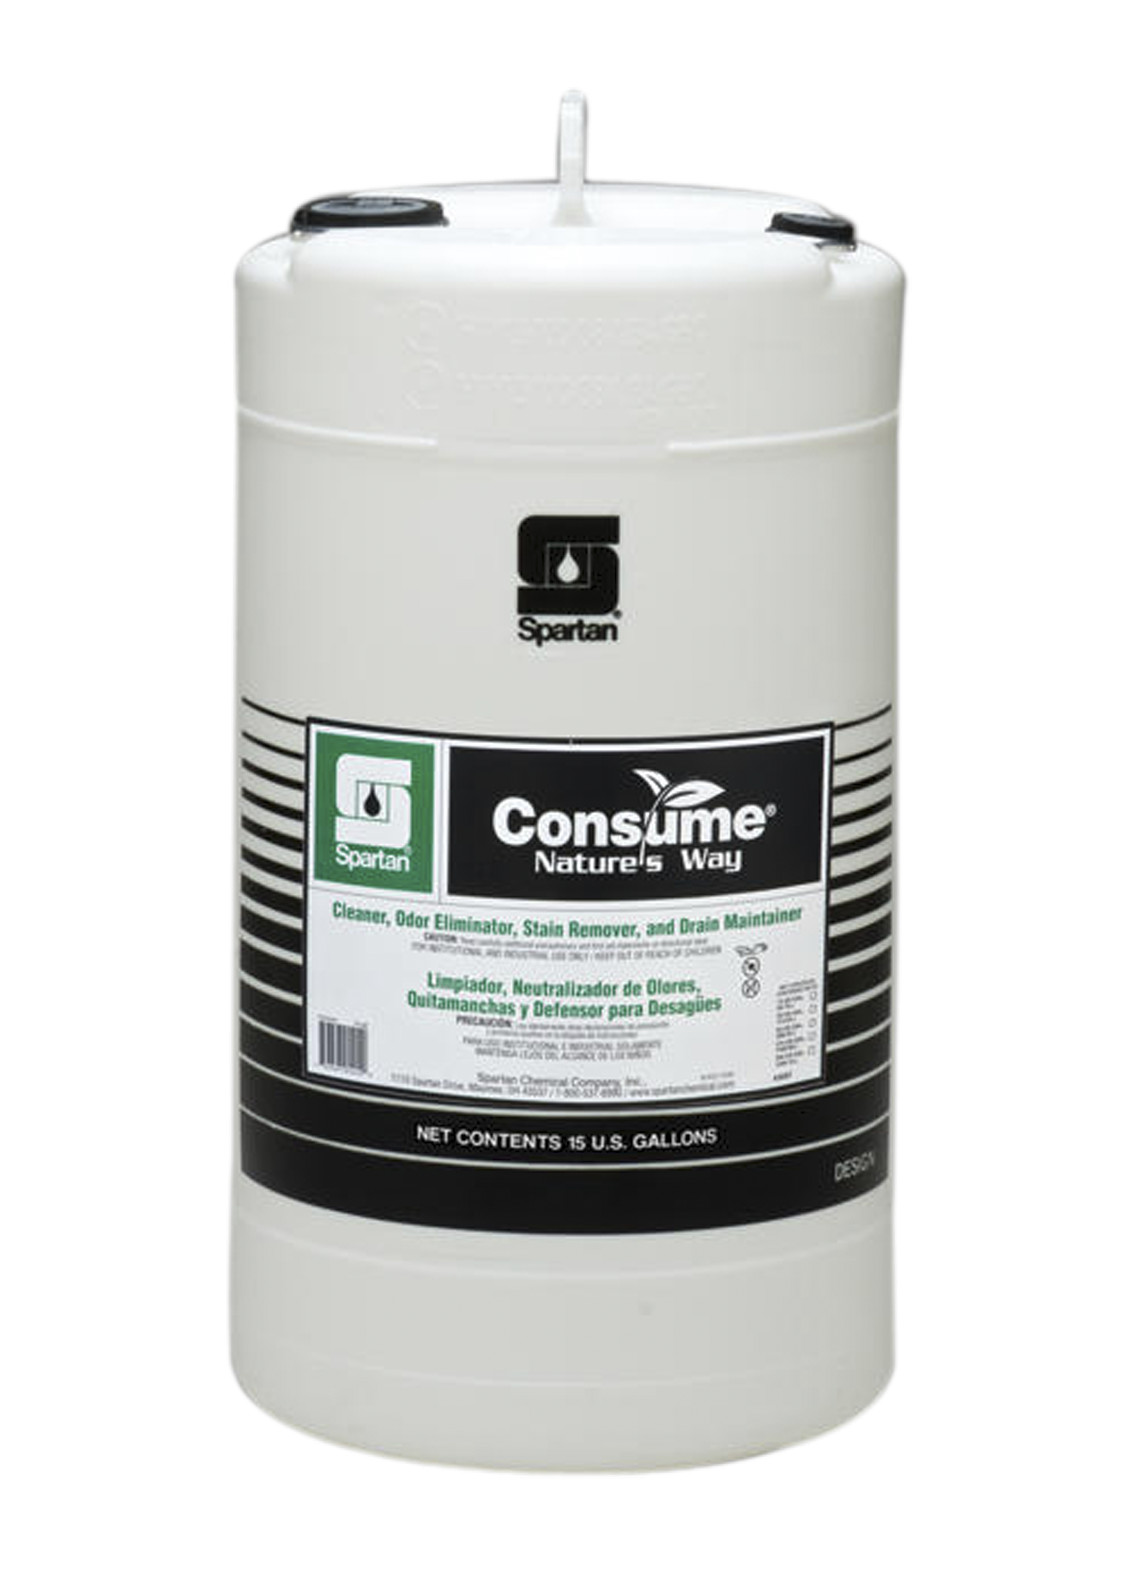 Spartan Chemical Company Consume, 15 GAL DRUM